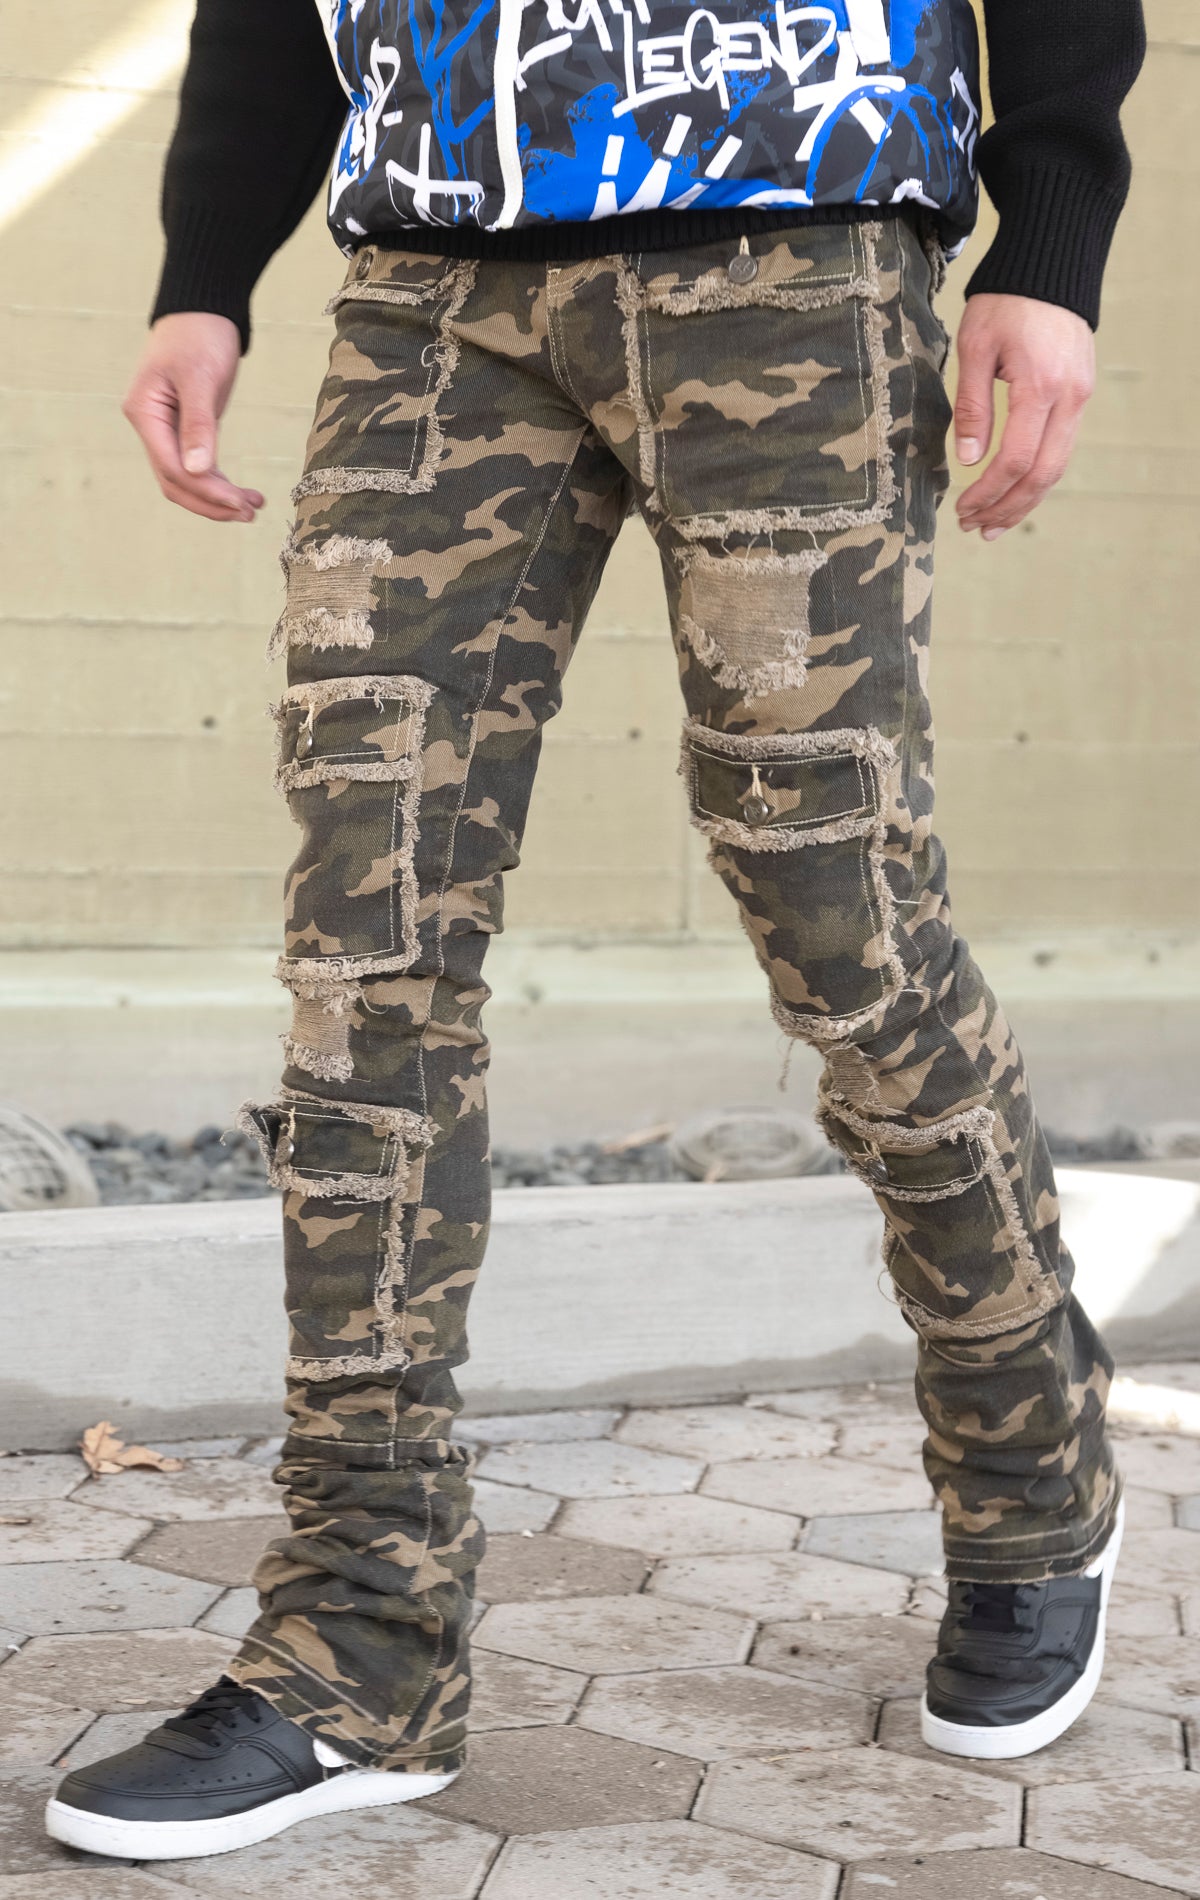 Camo super stacked jeans featuring an extra-long inseam and flared leg opening with distressing, stone washing and frays.